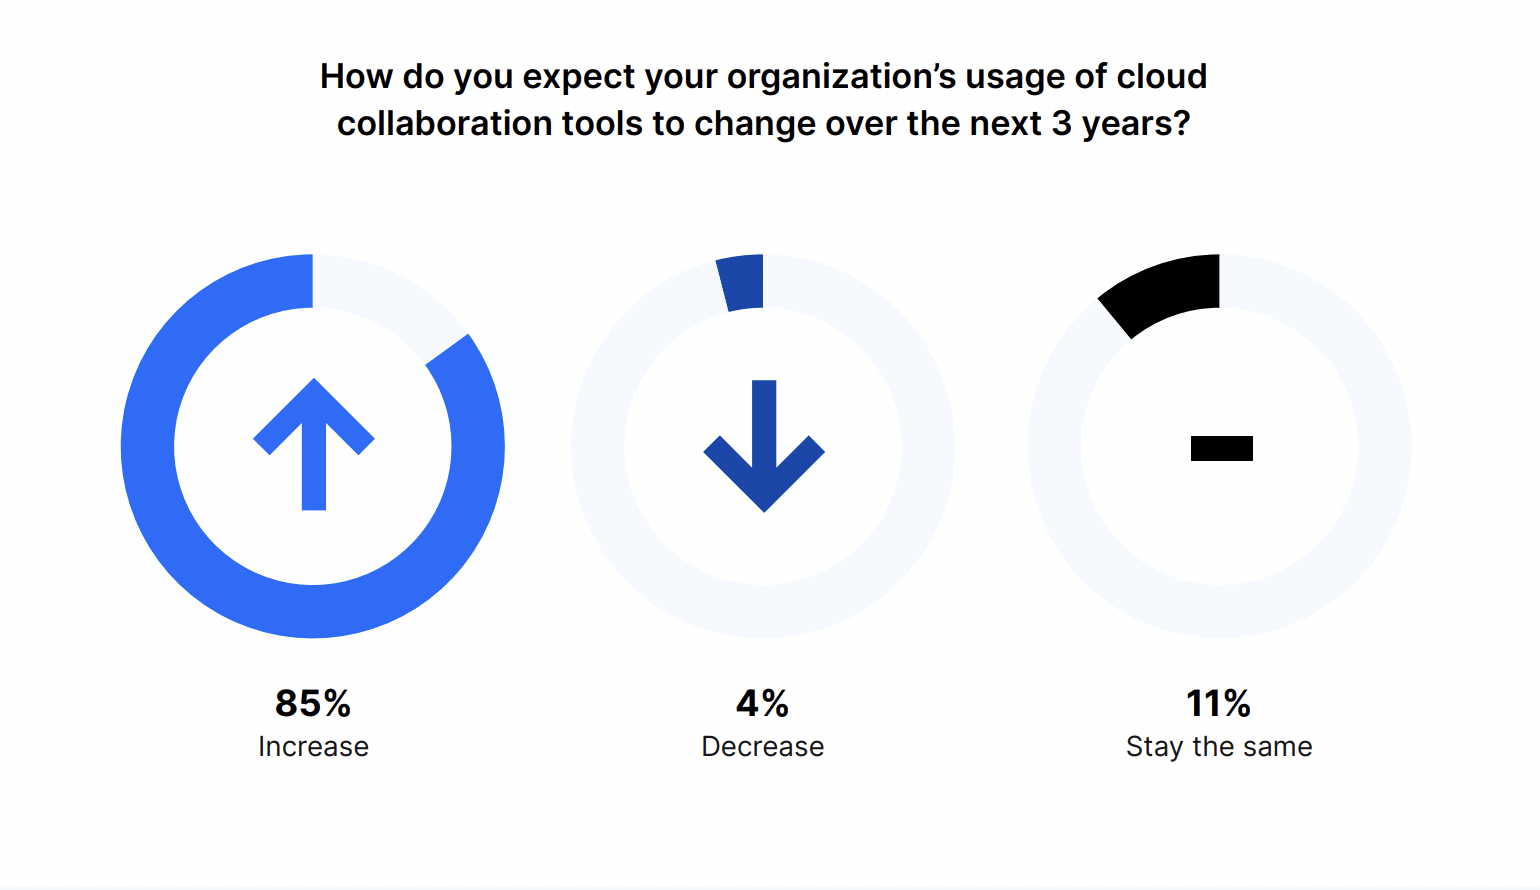 How do you expect your organization's usage of cloud collaboration tools to change over the next three years?